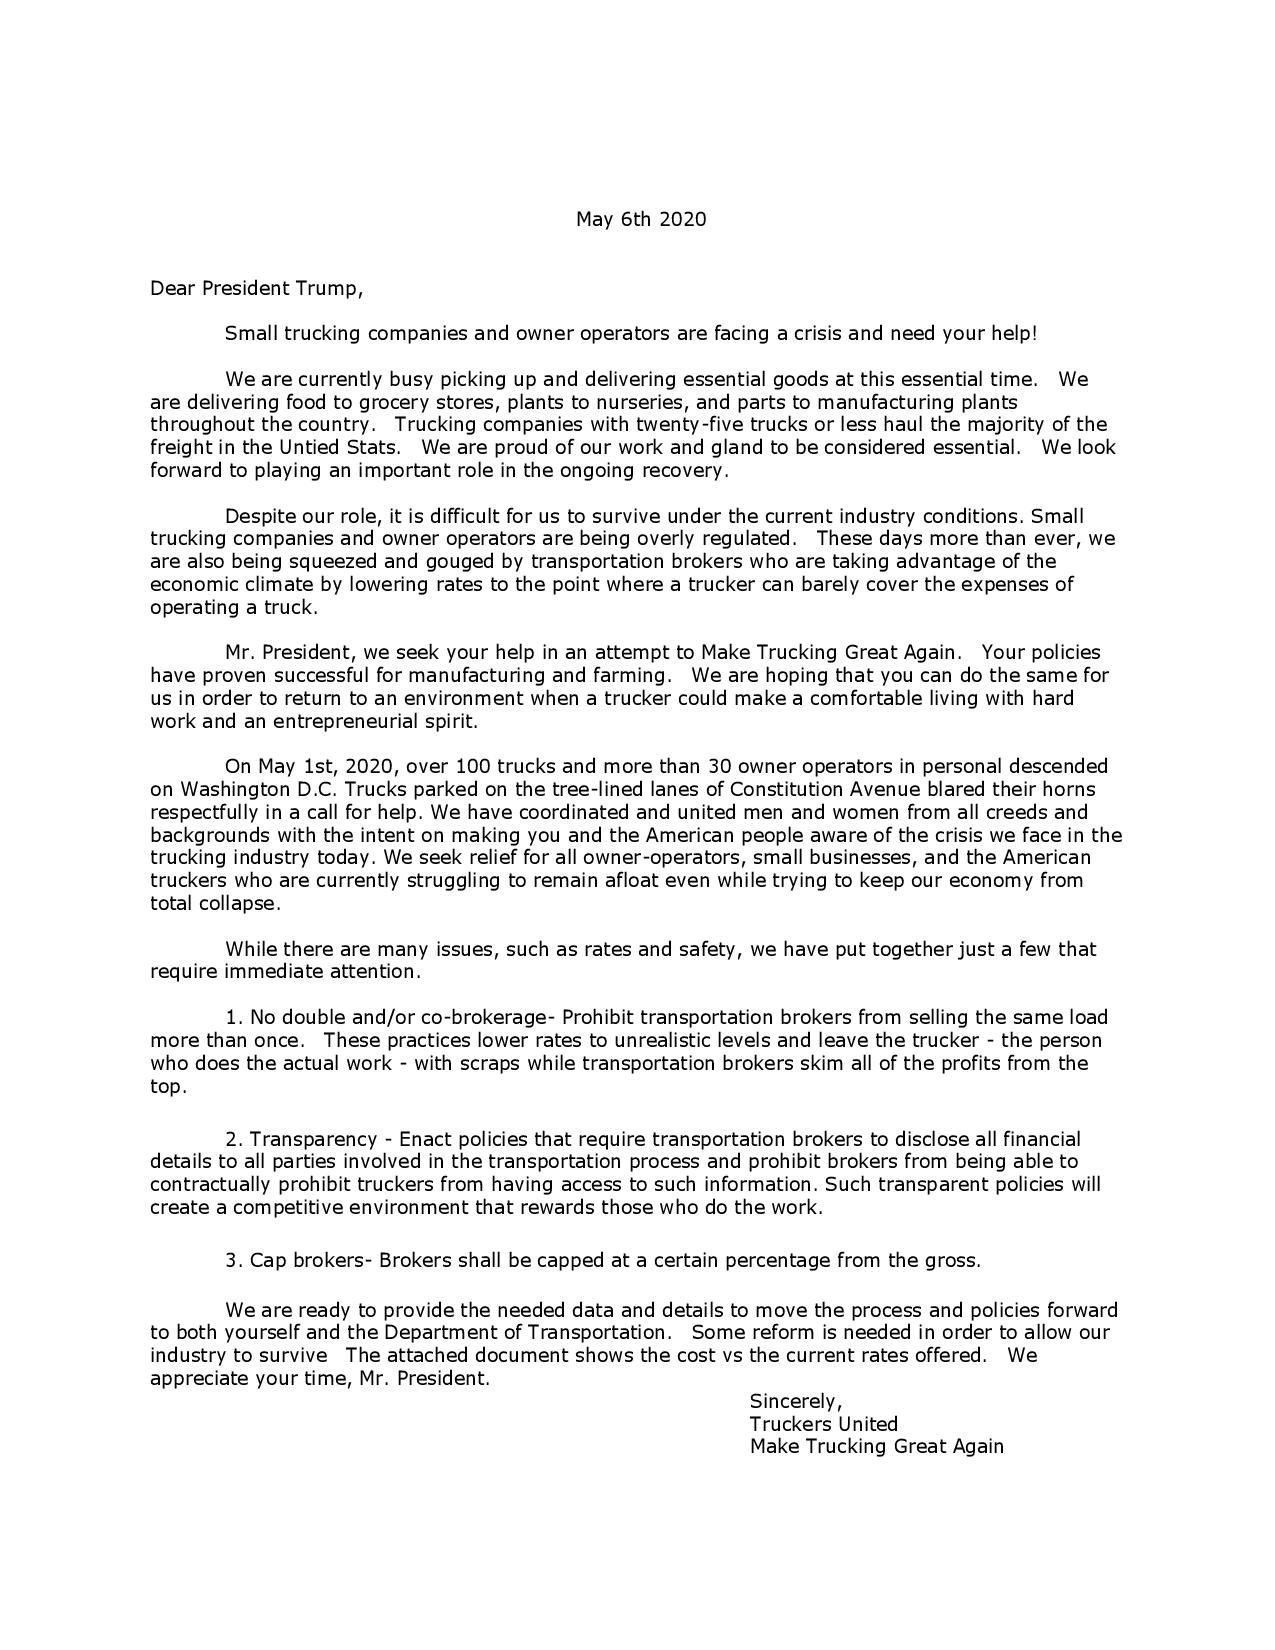 Trump Letter-page-001